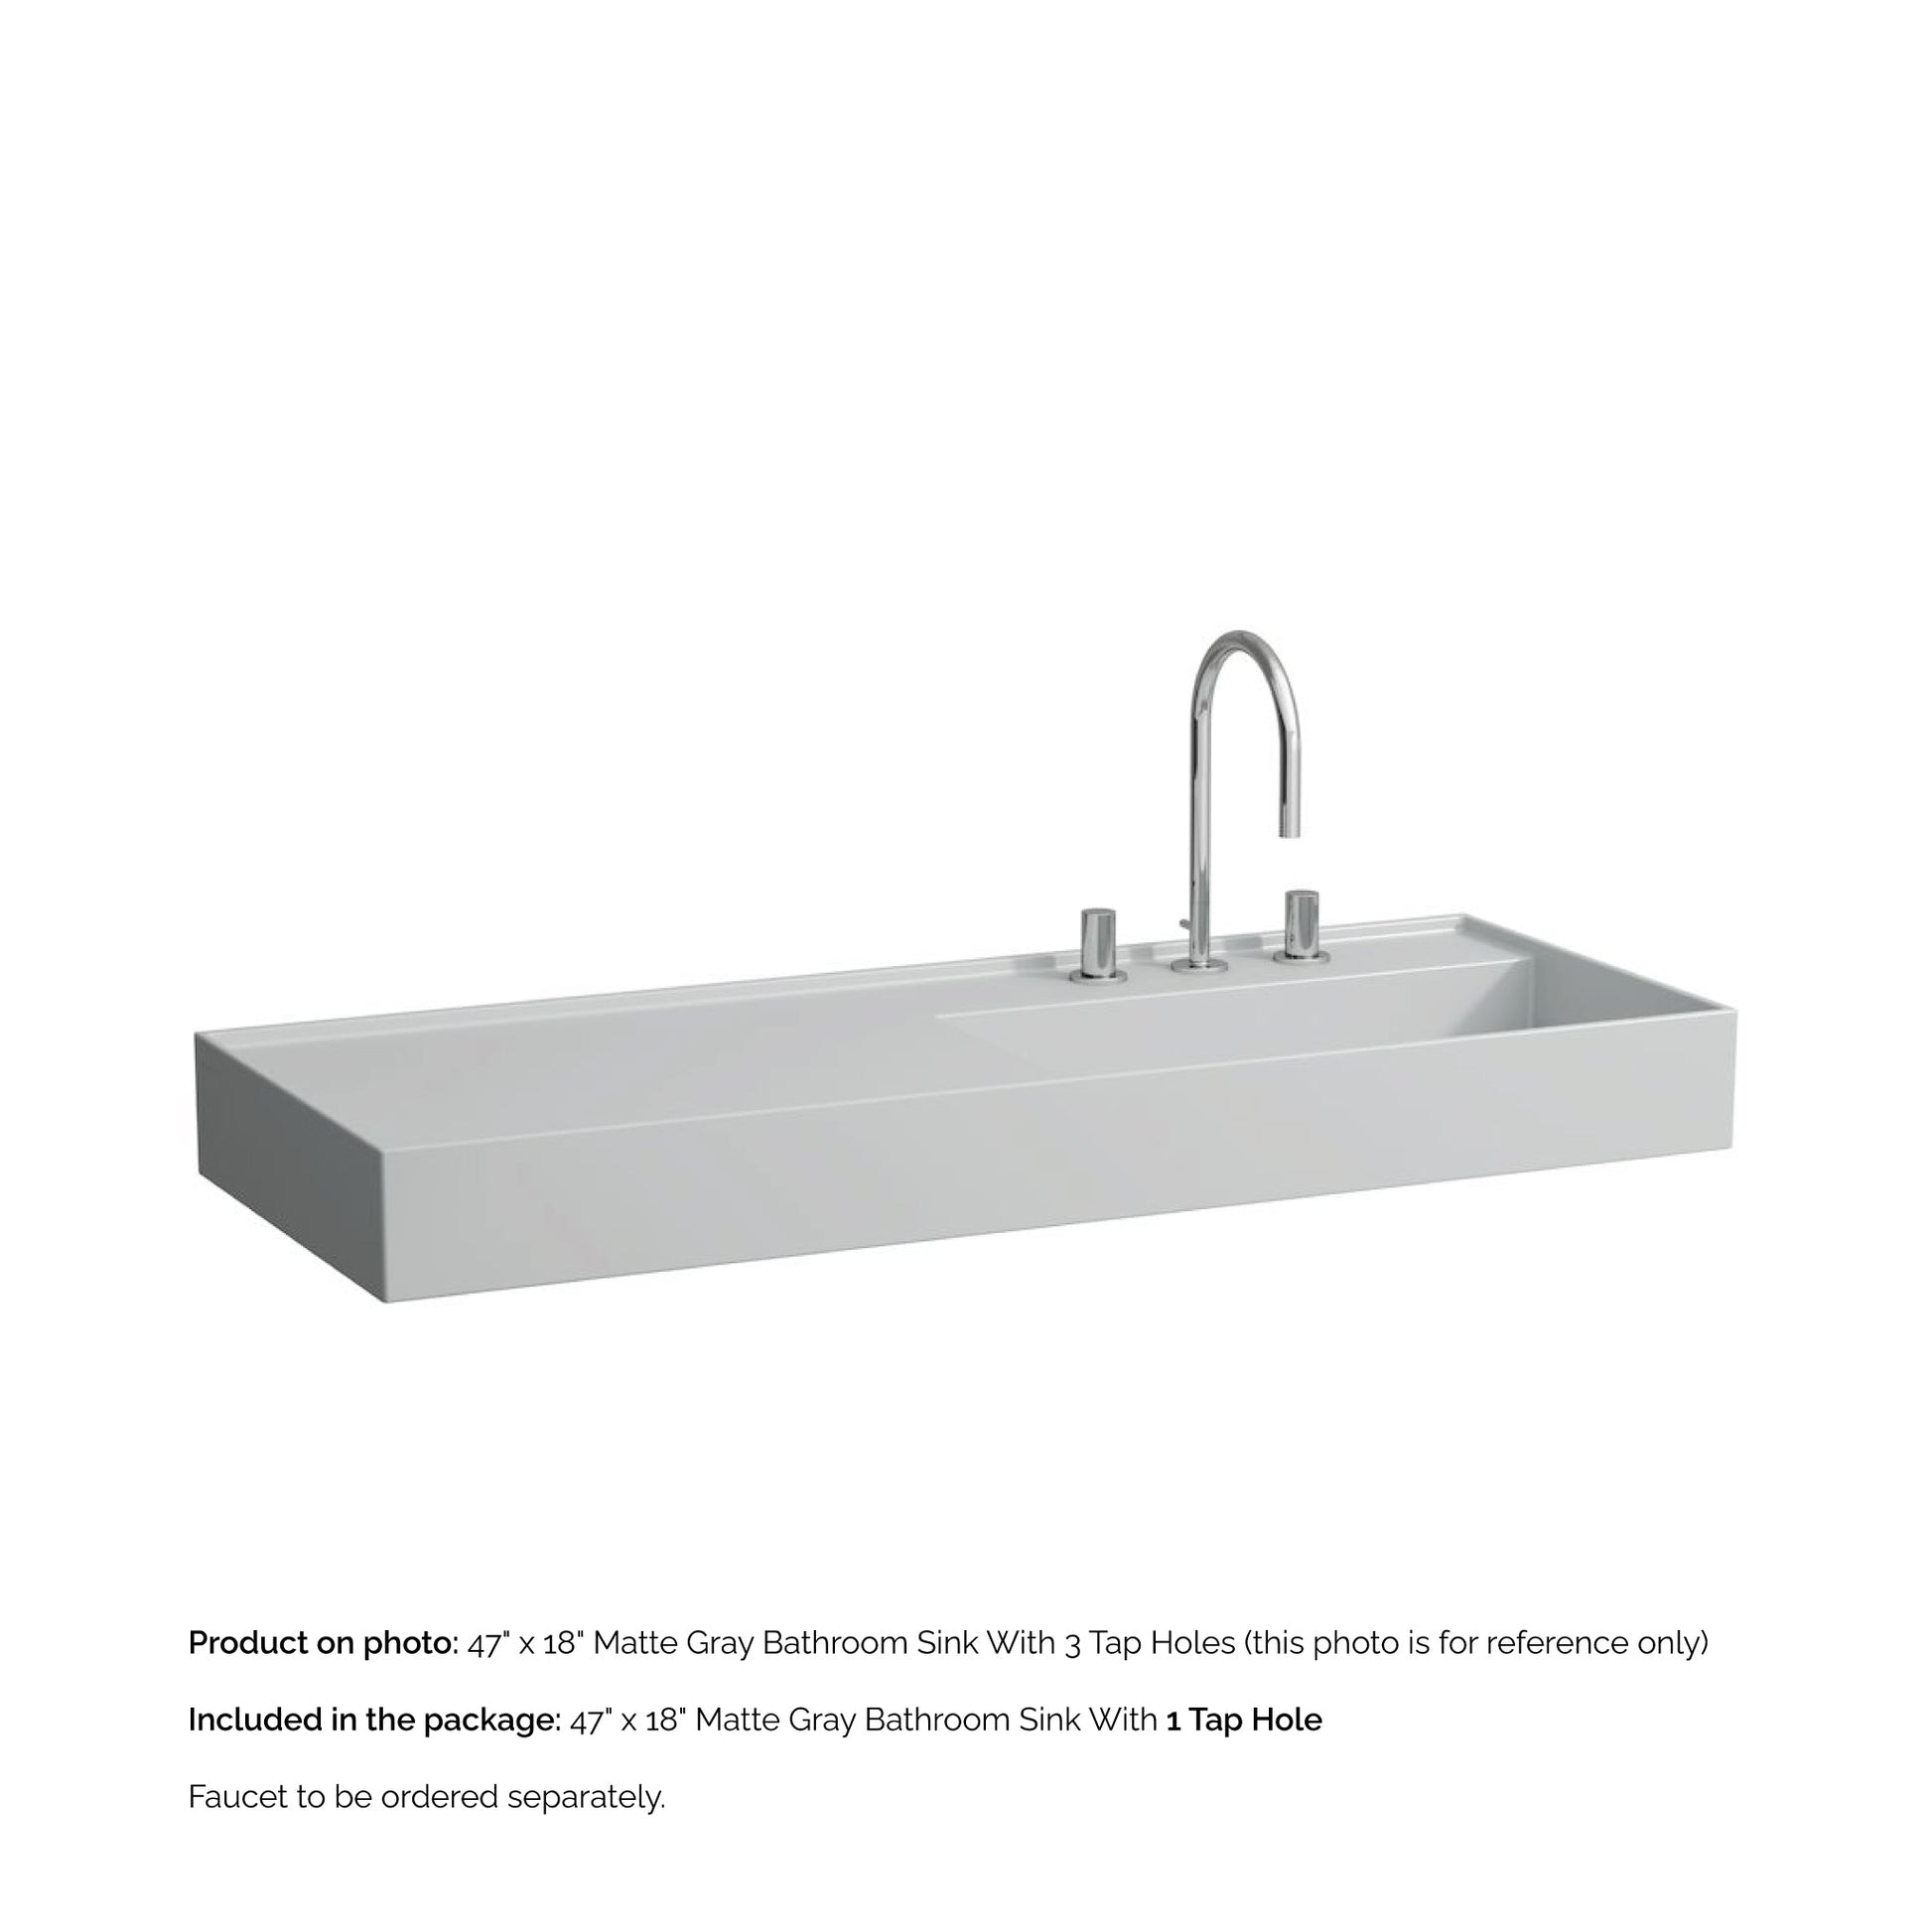 Laufen Kartell 47" x 18" Matte Gray Wall-Mounted Shelf-Left Bathroom Sink With Faucet Hole